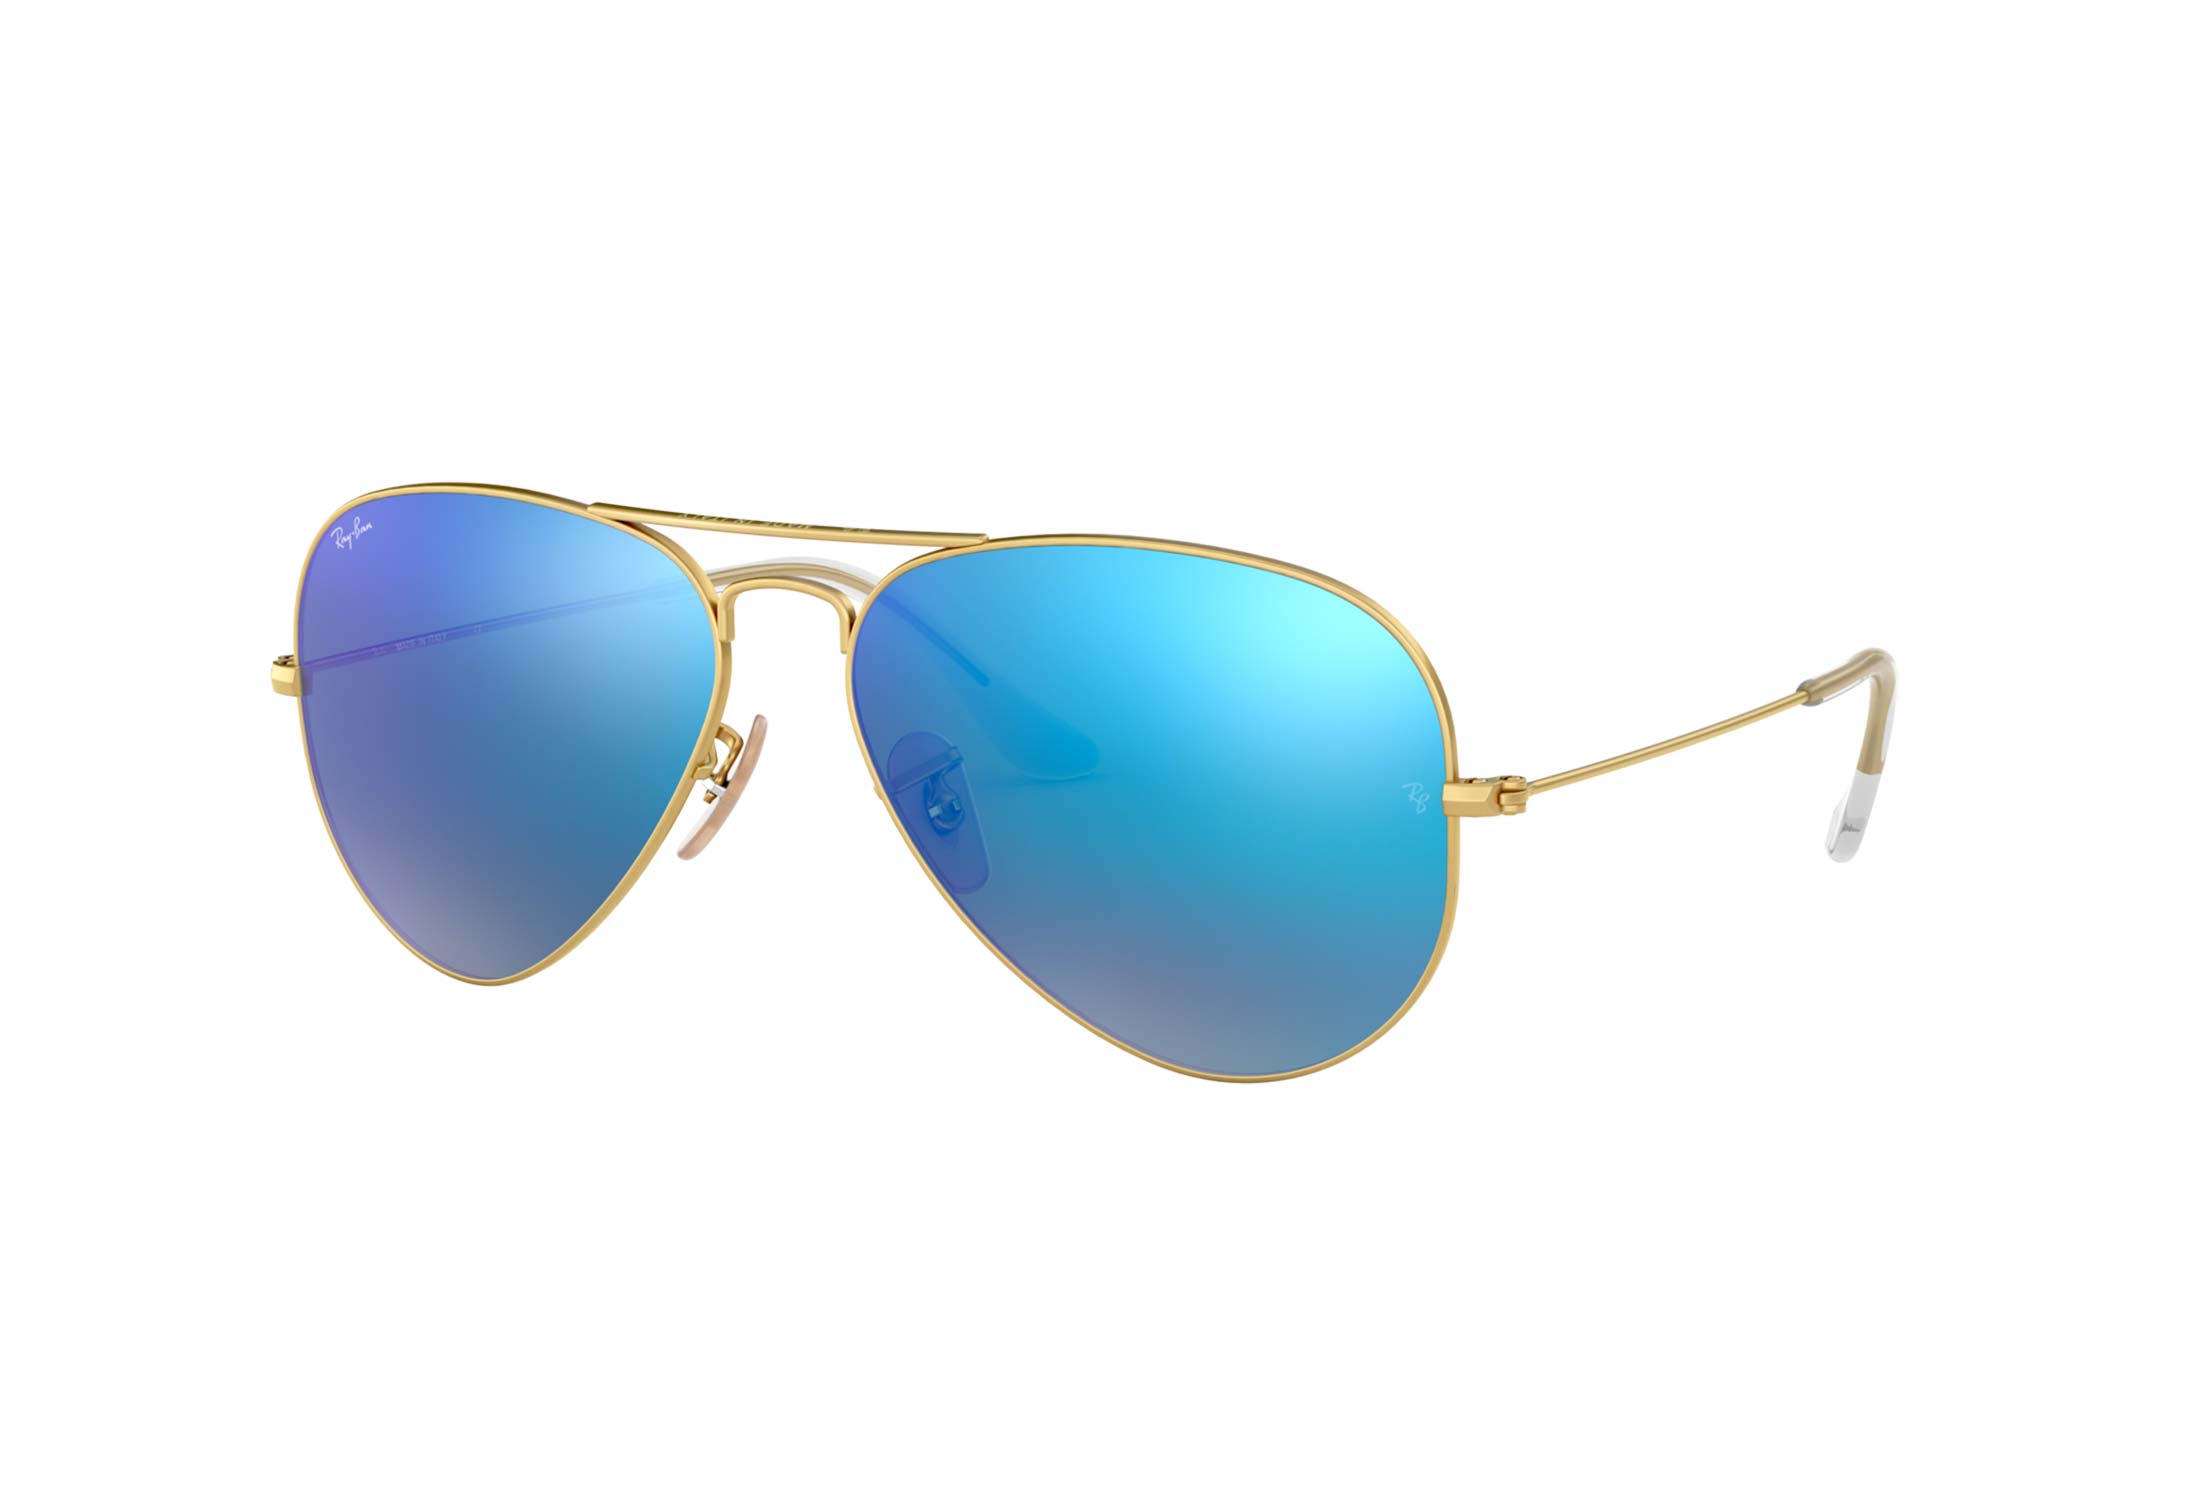 Ray-Ban Aviator Large Metal rb3025 112 17 - Cry.Green Mirror Multil.Blue